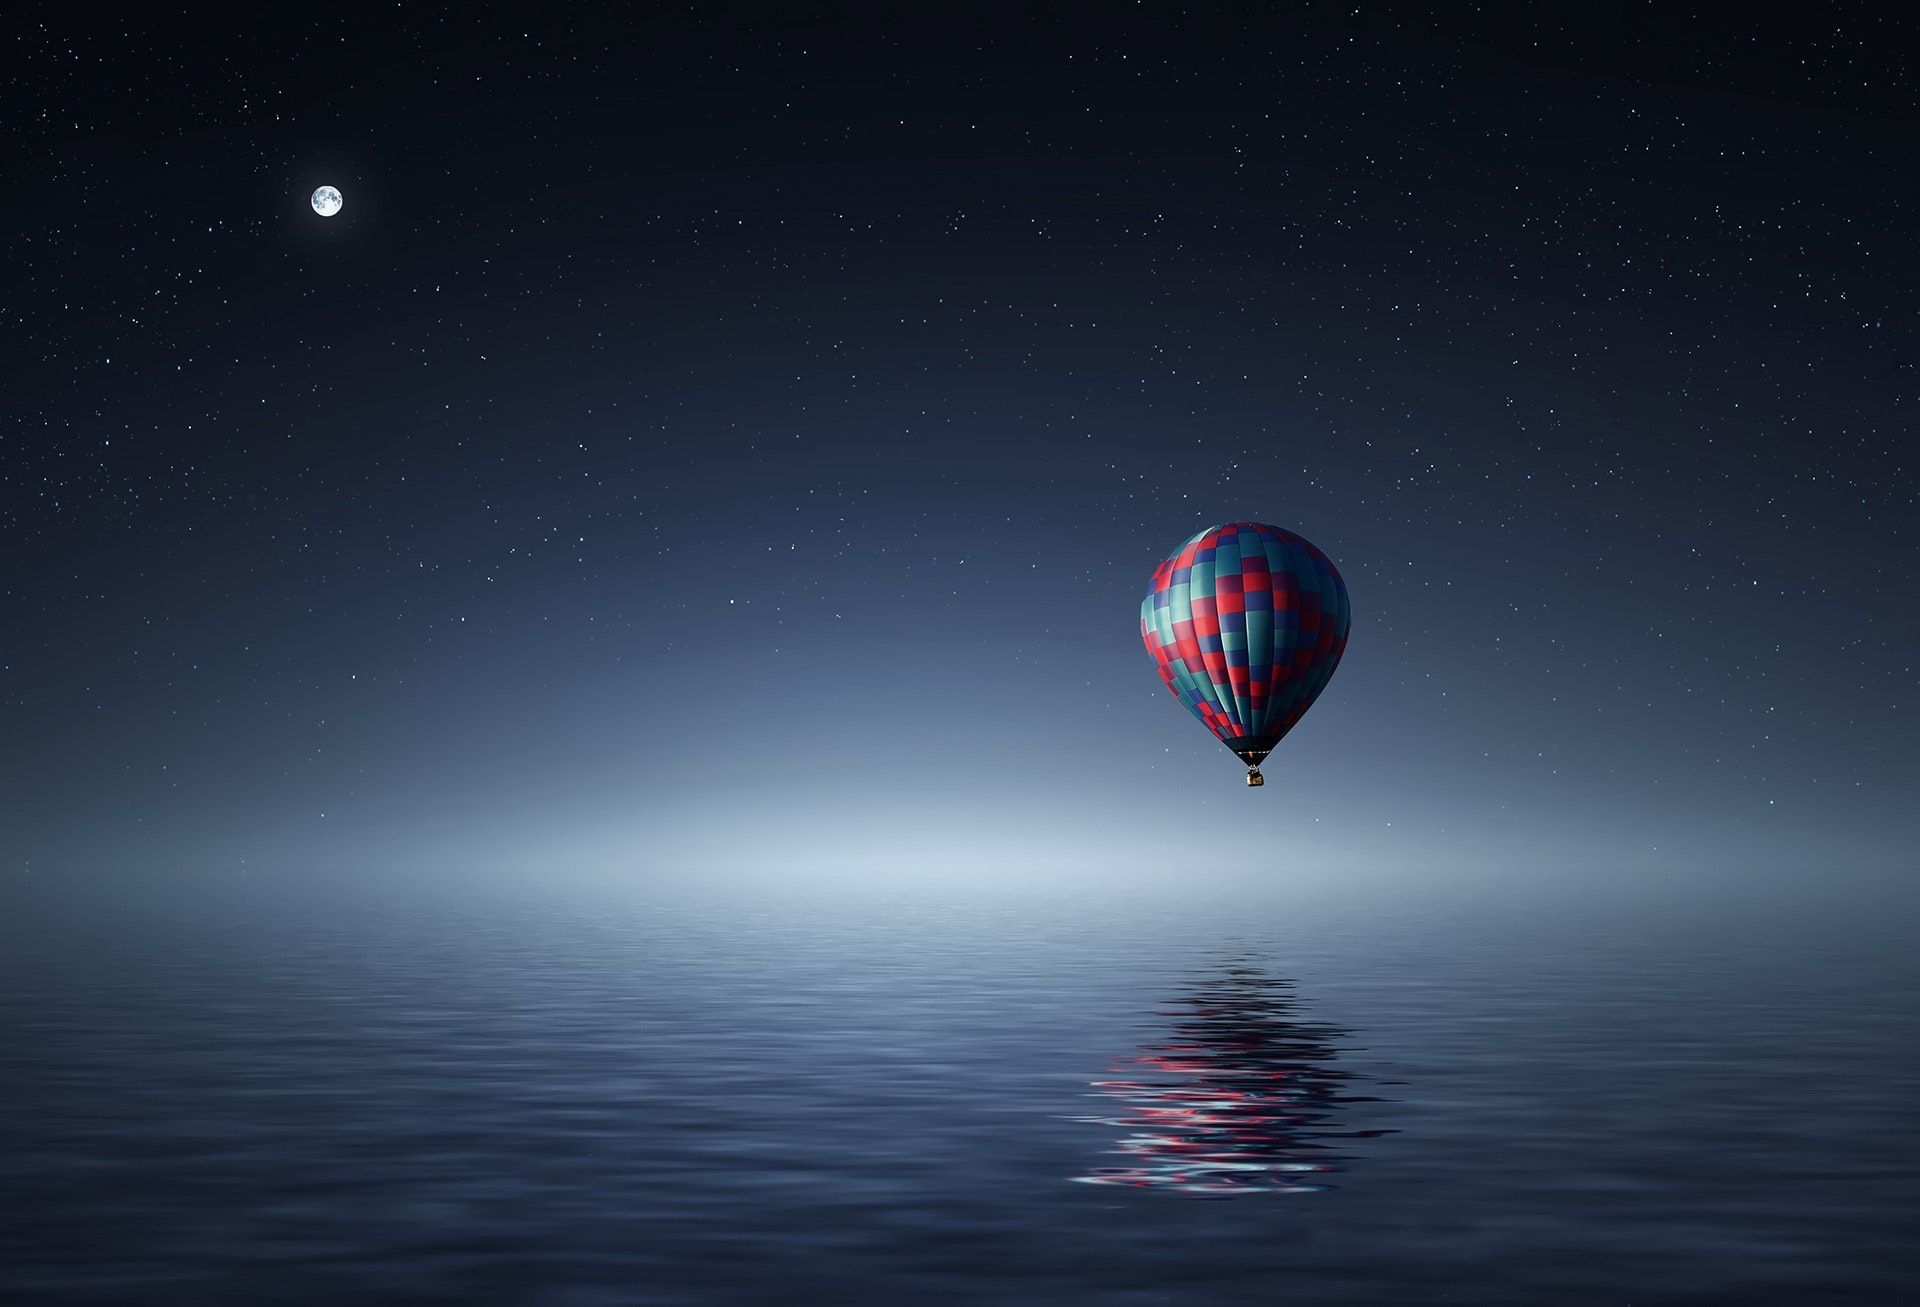 red-and-blue-hot-air-balloon-floating-on-air-on-body-of-36487.jpg